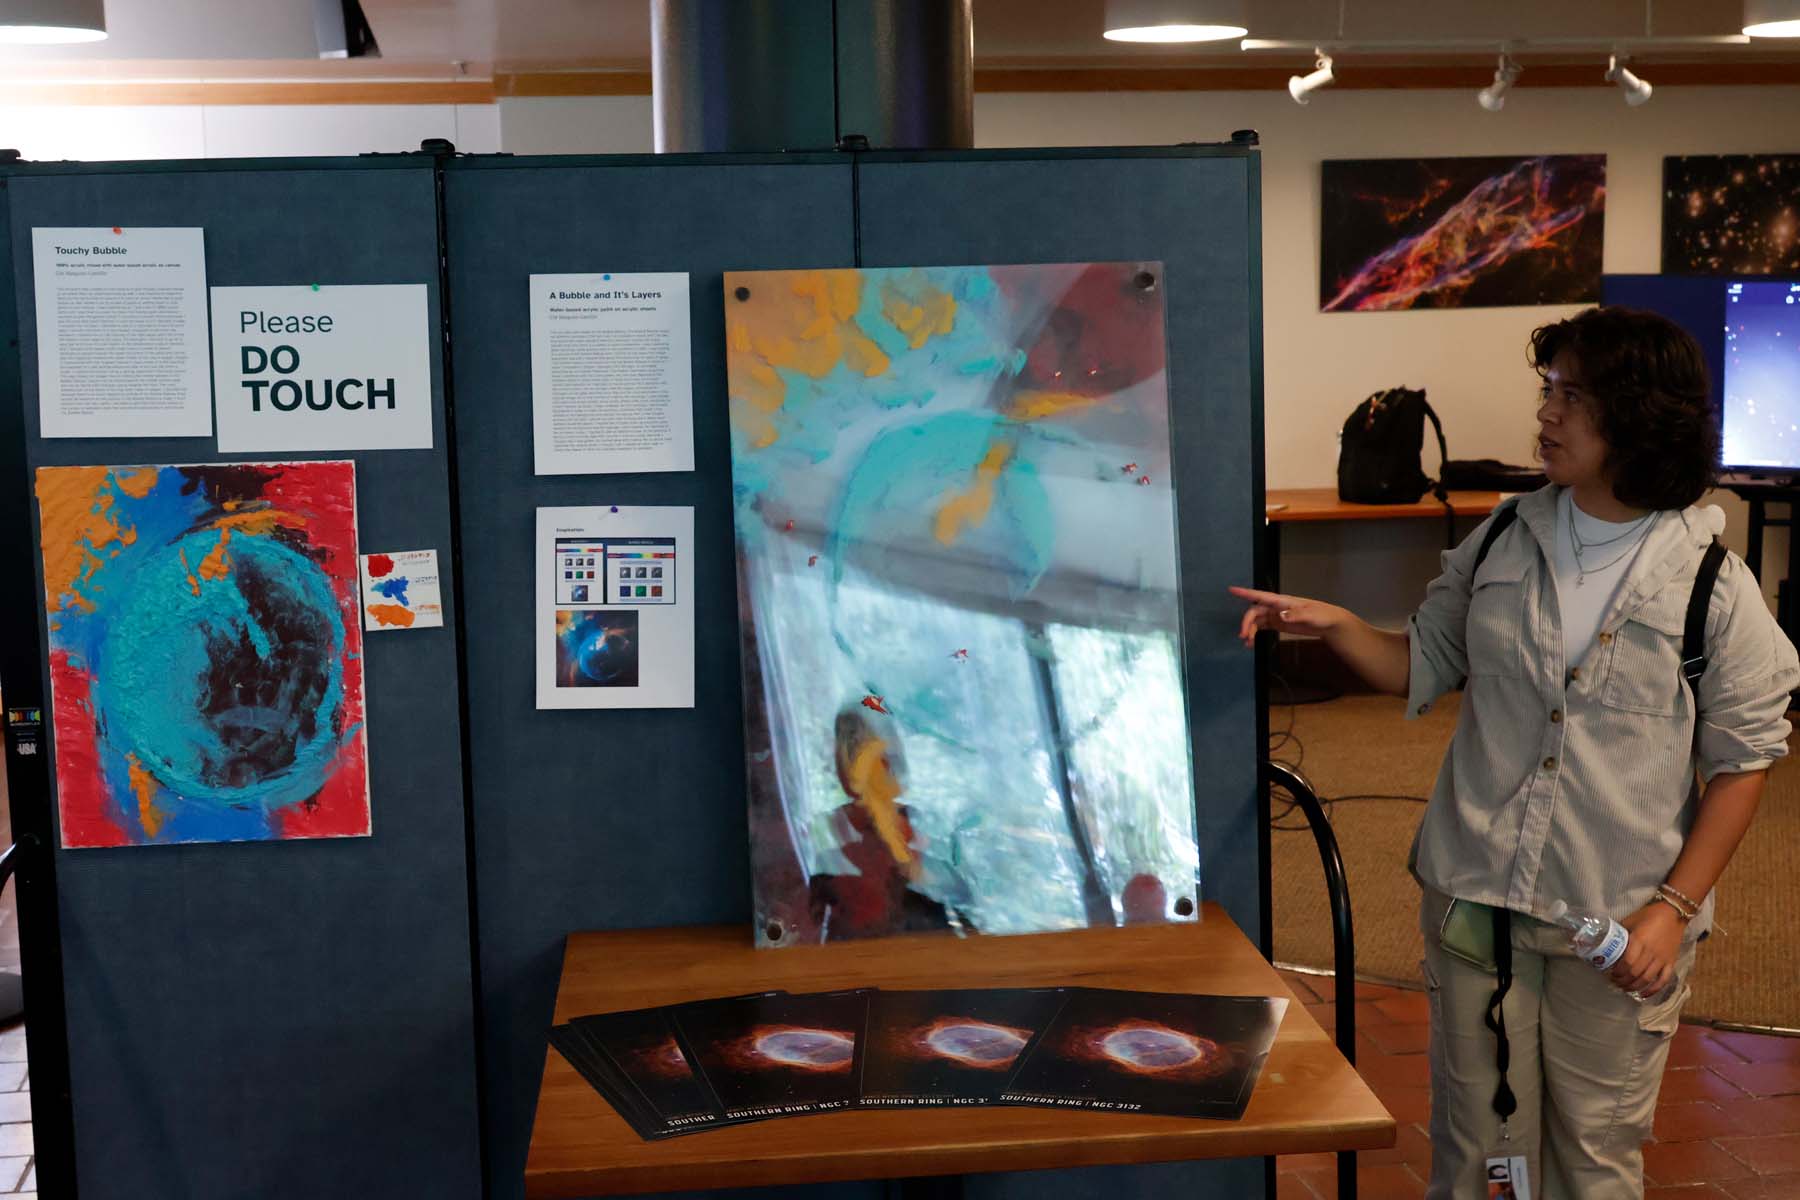 A student points towards a piece that shows the bubble nebula; the piece is layered plexiglass that has been painted and stacked to give it a textured look. To the left is a more traditional "oil on canvas" version of the piece